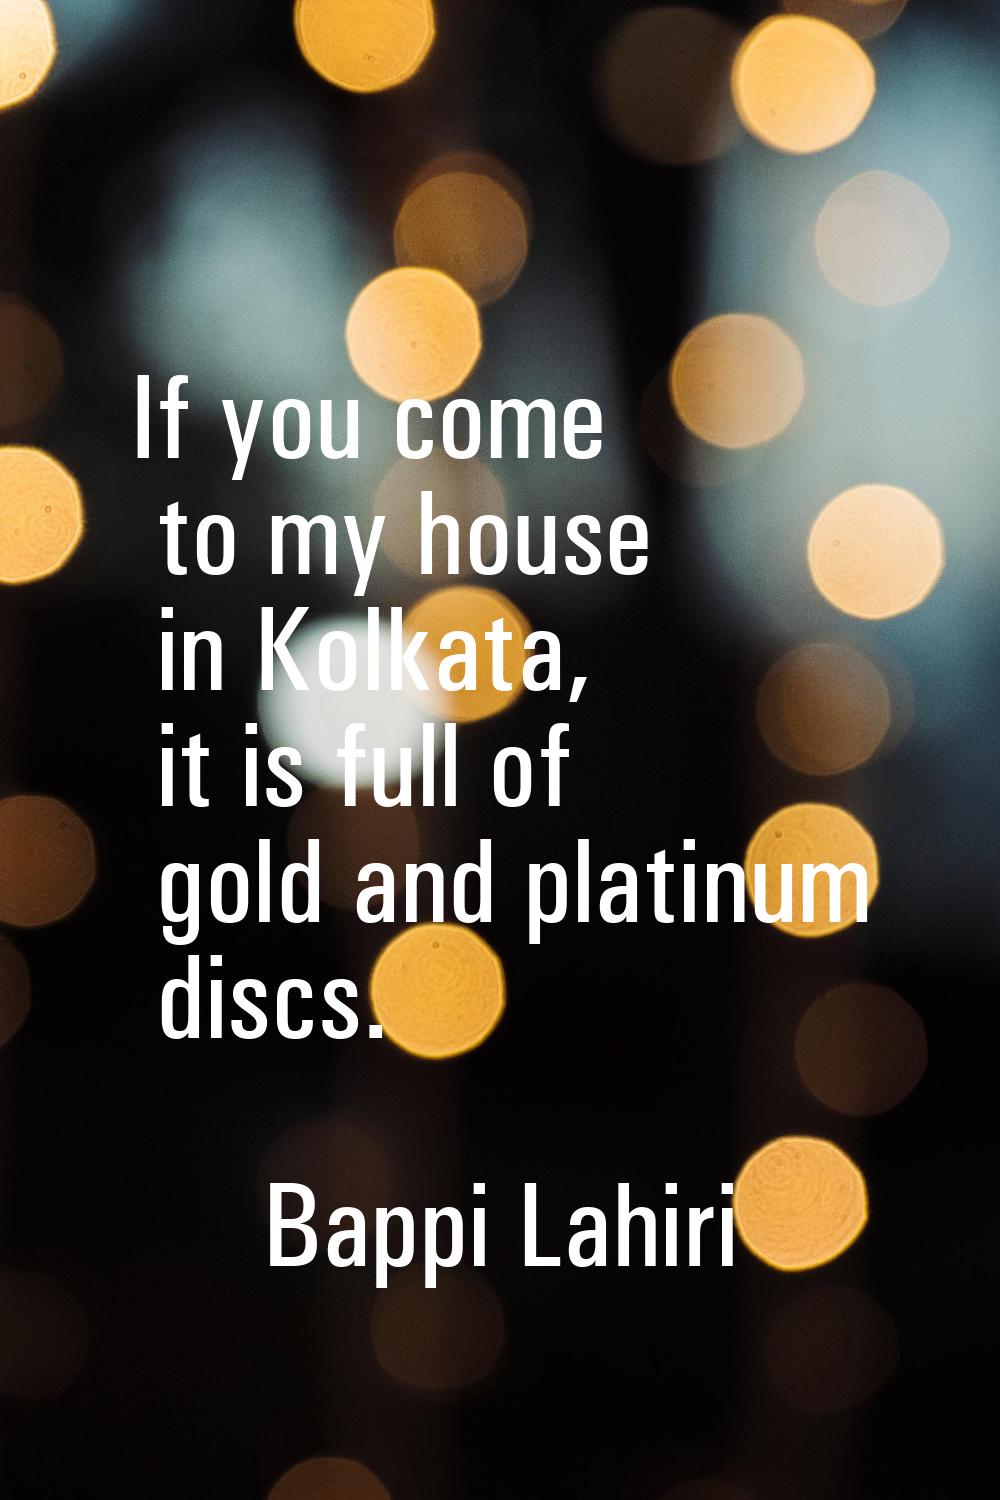 If you come to my house in Kolkata, it is full of gold and platinum discs.